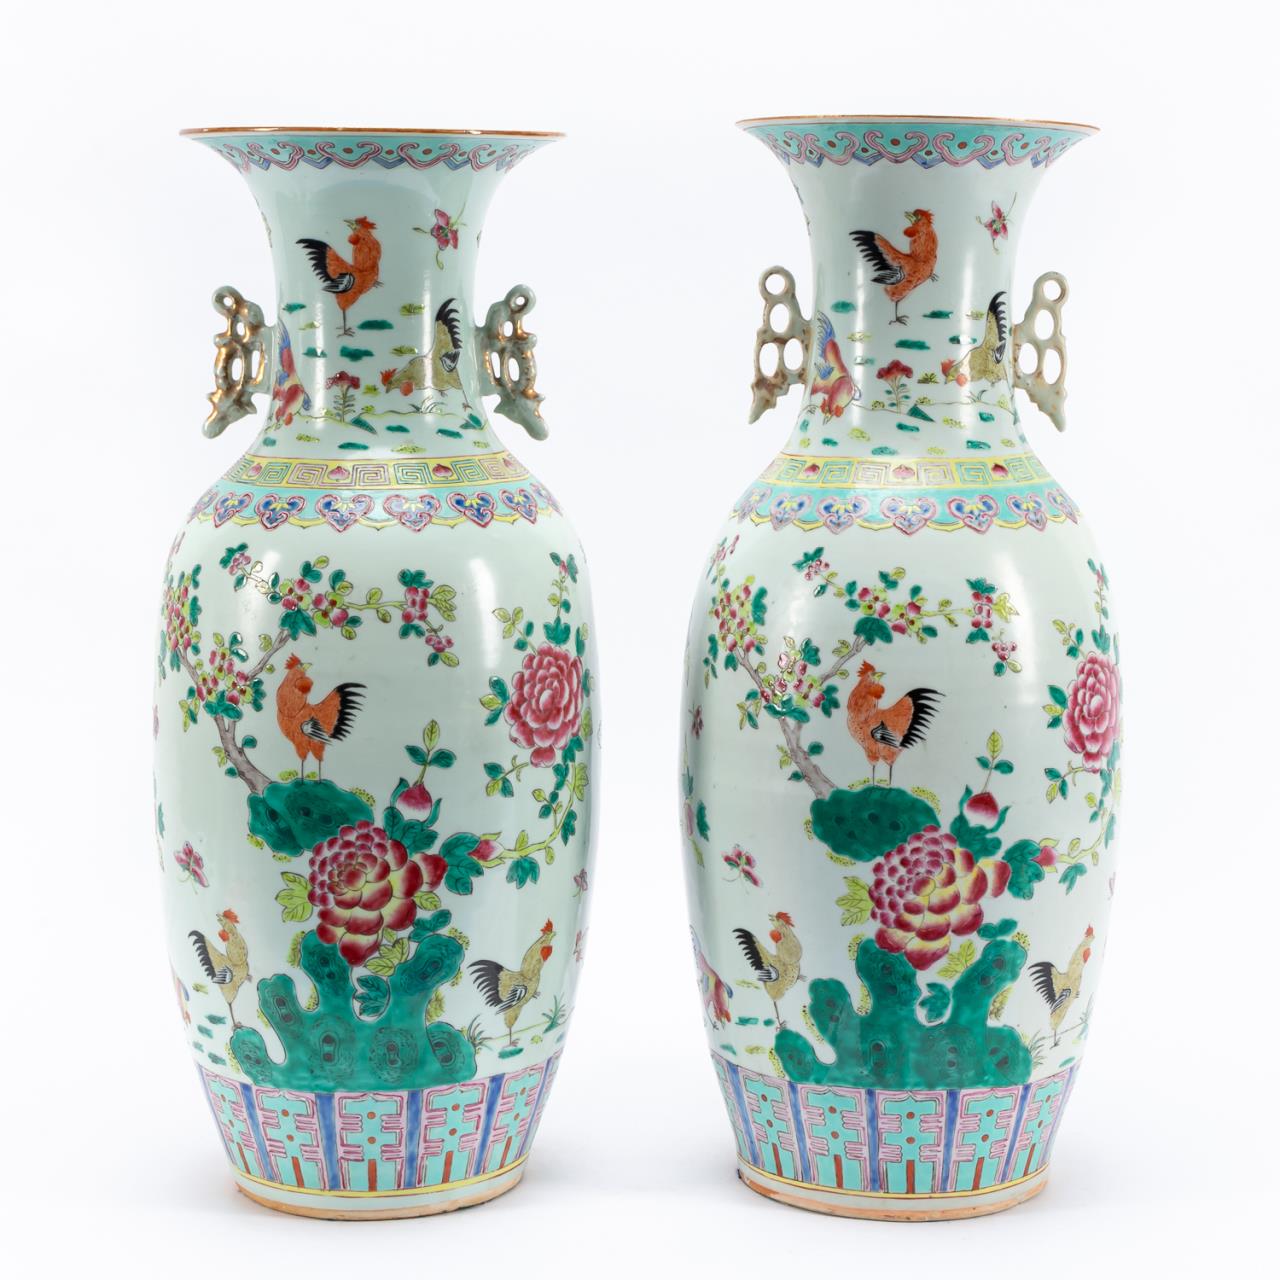 PAIR, CHINESE PEONY & ROOSTER PORCELAIN